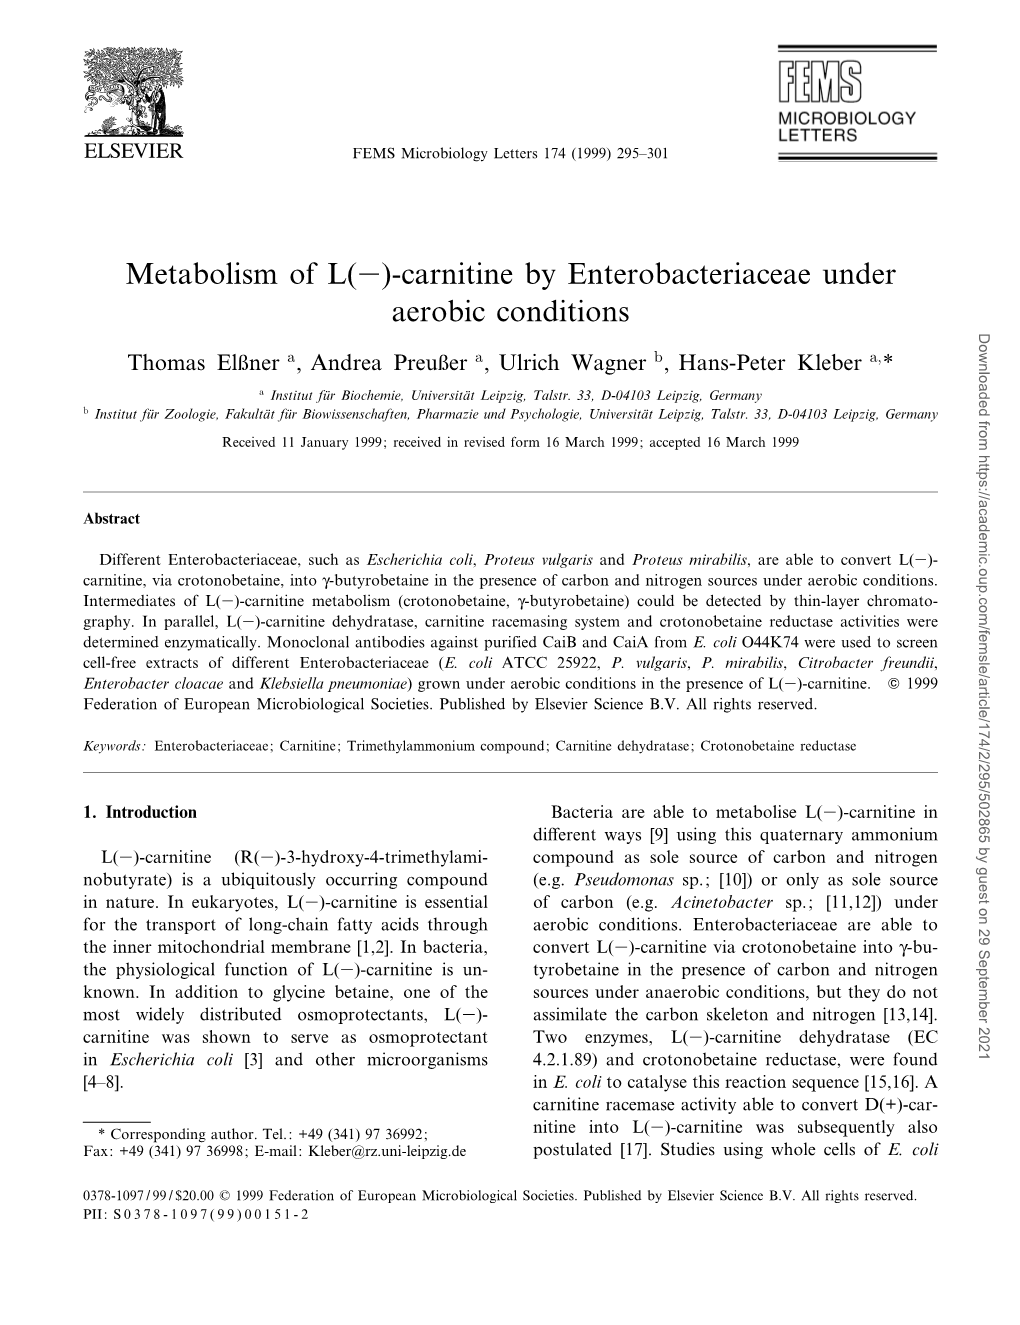 Metabolism of L (−)-Carnitine by Enterobacteriaceae Under Aerobic